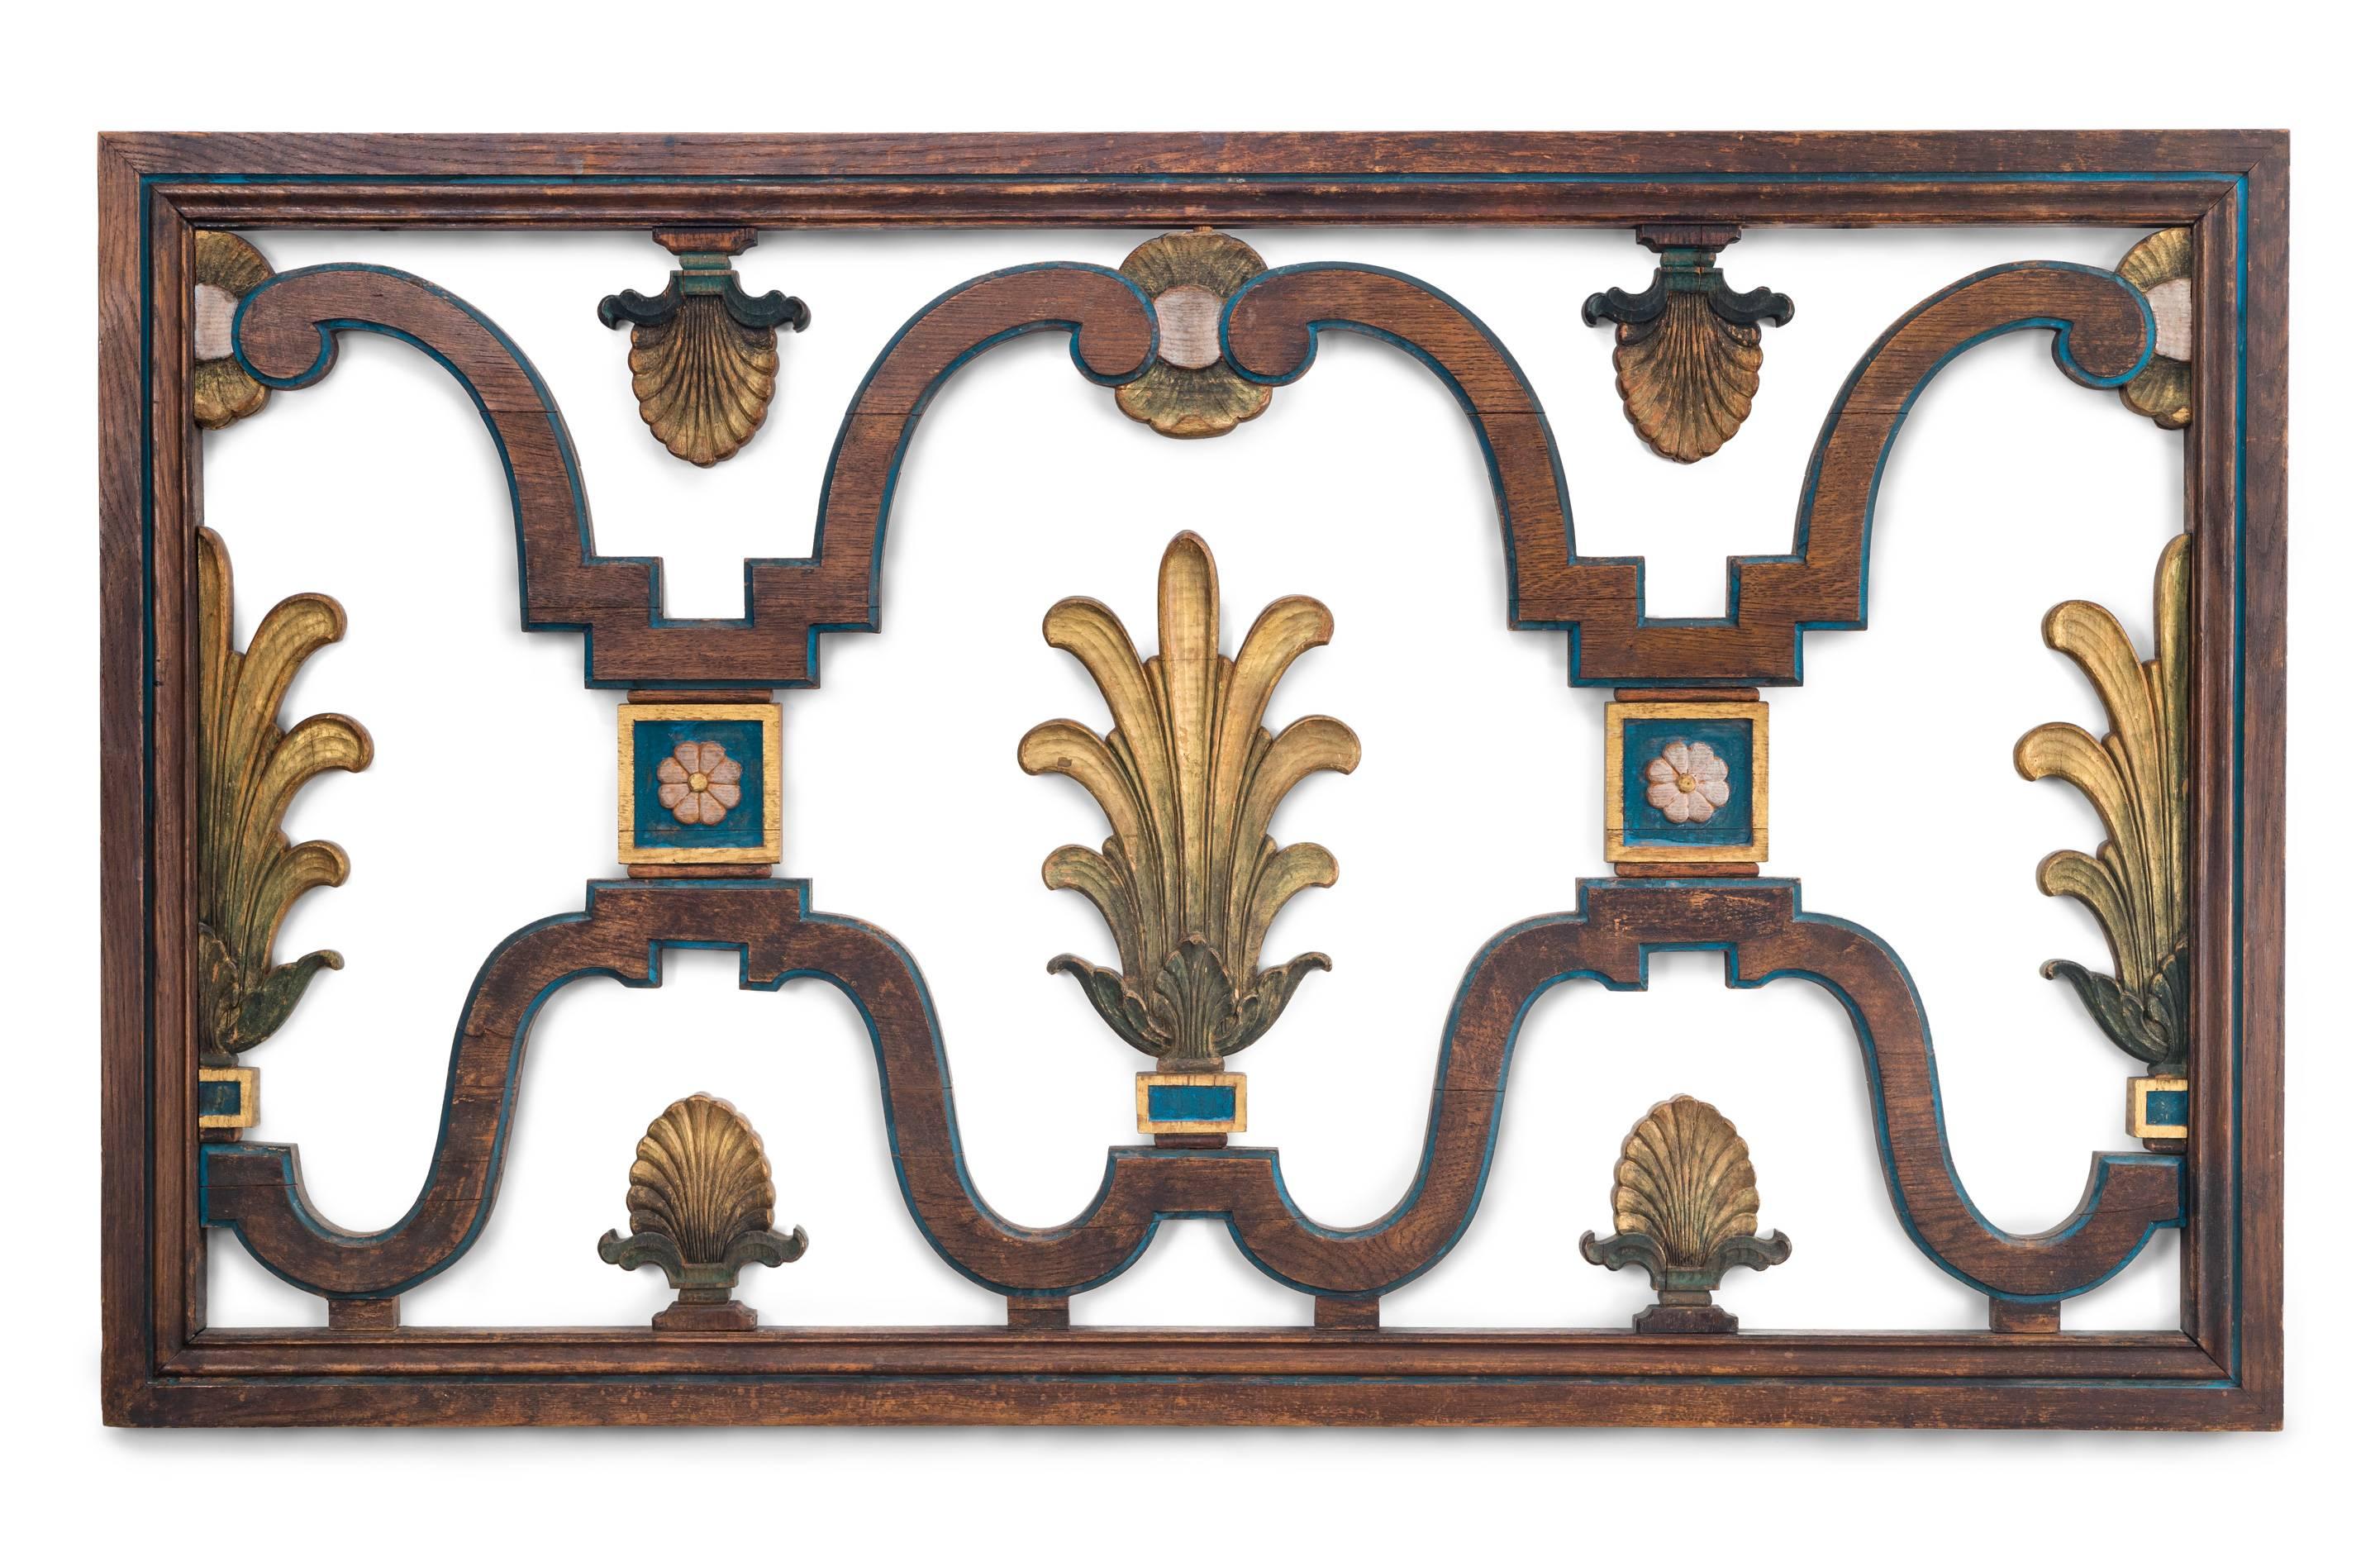 Can be hung on the wall like a picture (removing feet) or as a fire screen. In beautiful condition, the subdued and naturally patinated oak highlighted by mellowed original paint and gilding. The rectangular frame enclosing undulating scrollwork